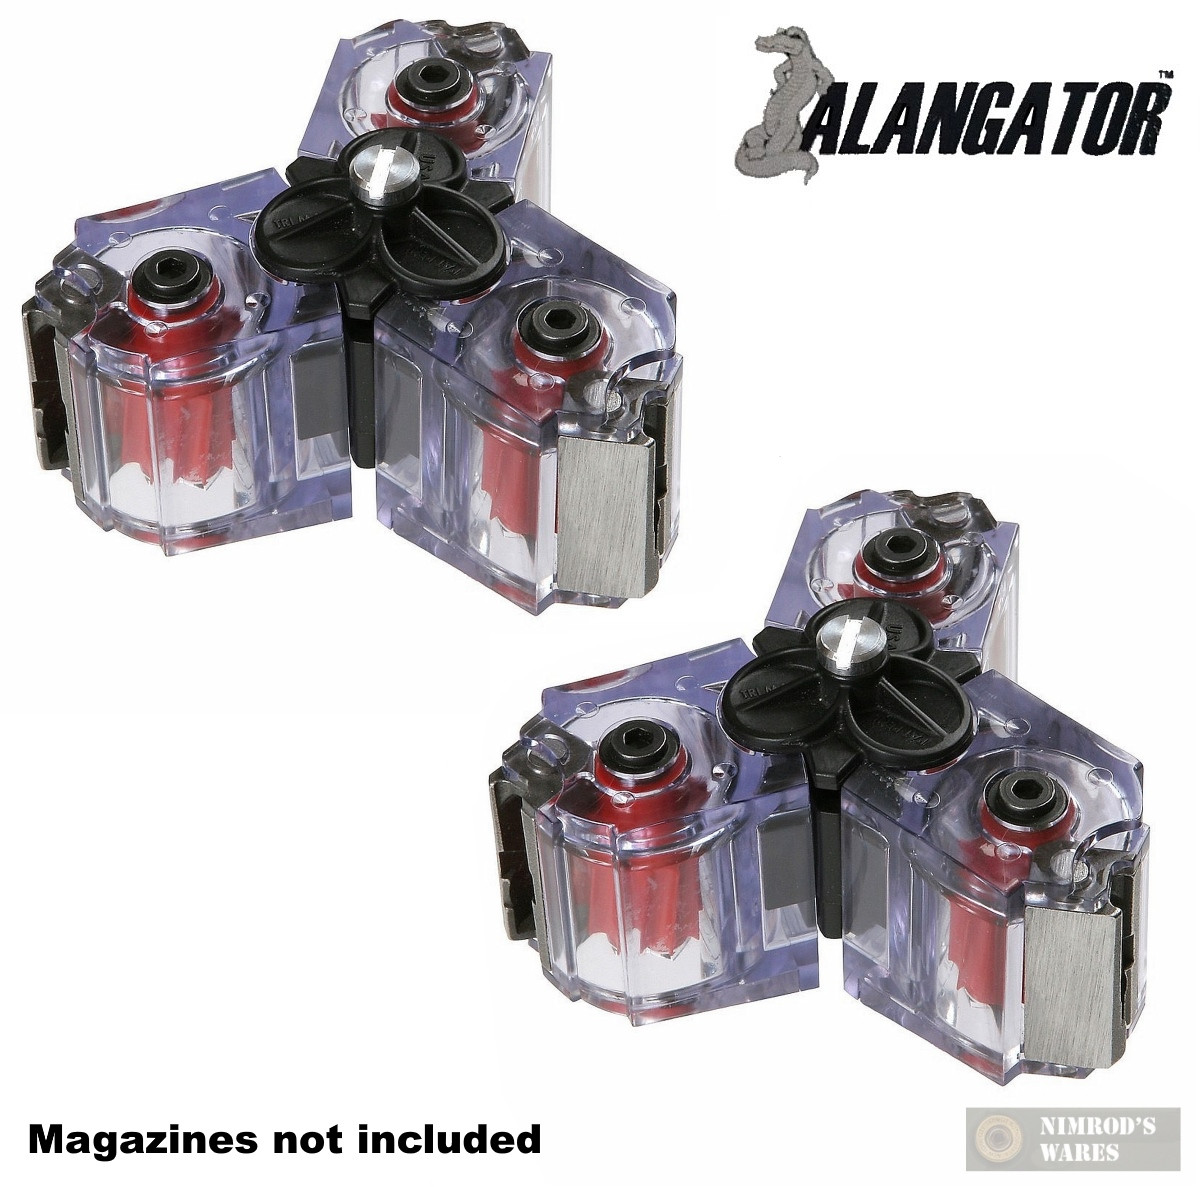 2 Ruger 10-22 10 Rd Mags Alangator Trimag for The 10/22 & Dust Caps for sale online 